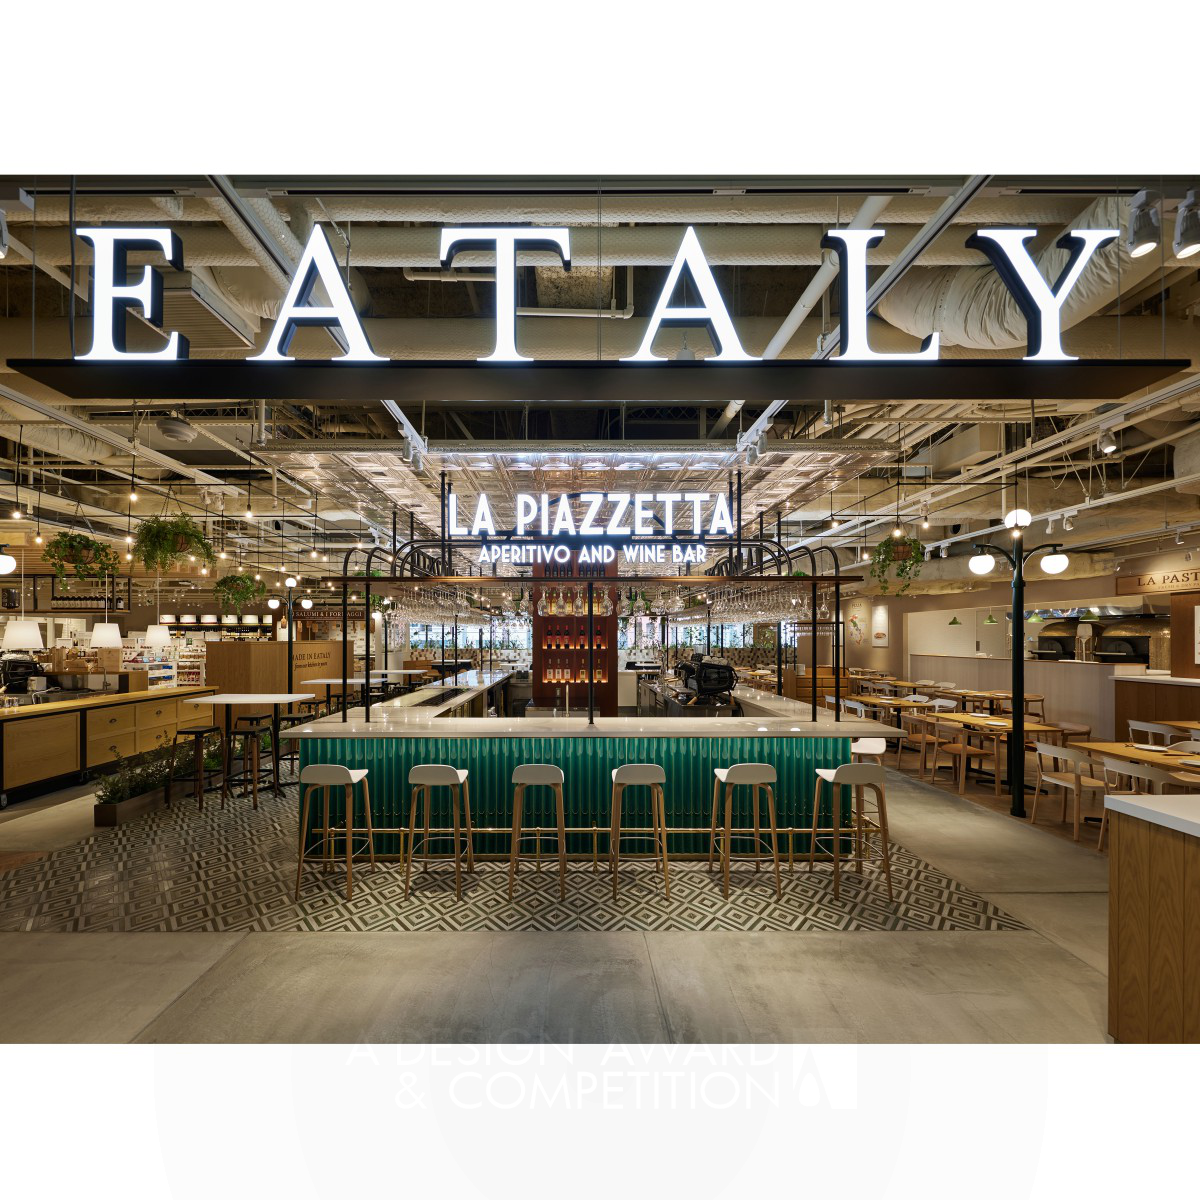 Uds Ltd. wins Silver at the prestigious A' Interior Space, Retail and Exhibition Design Award with Eataly Ginza Restaurant.